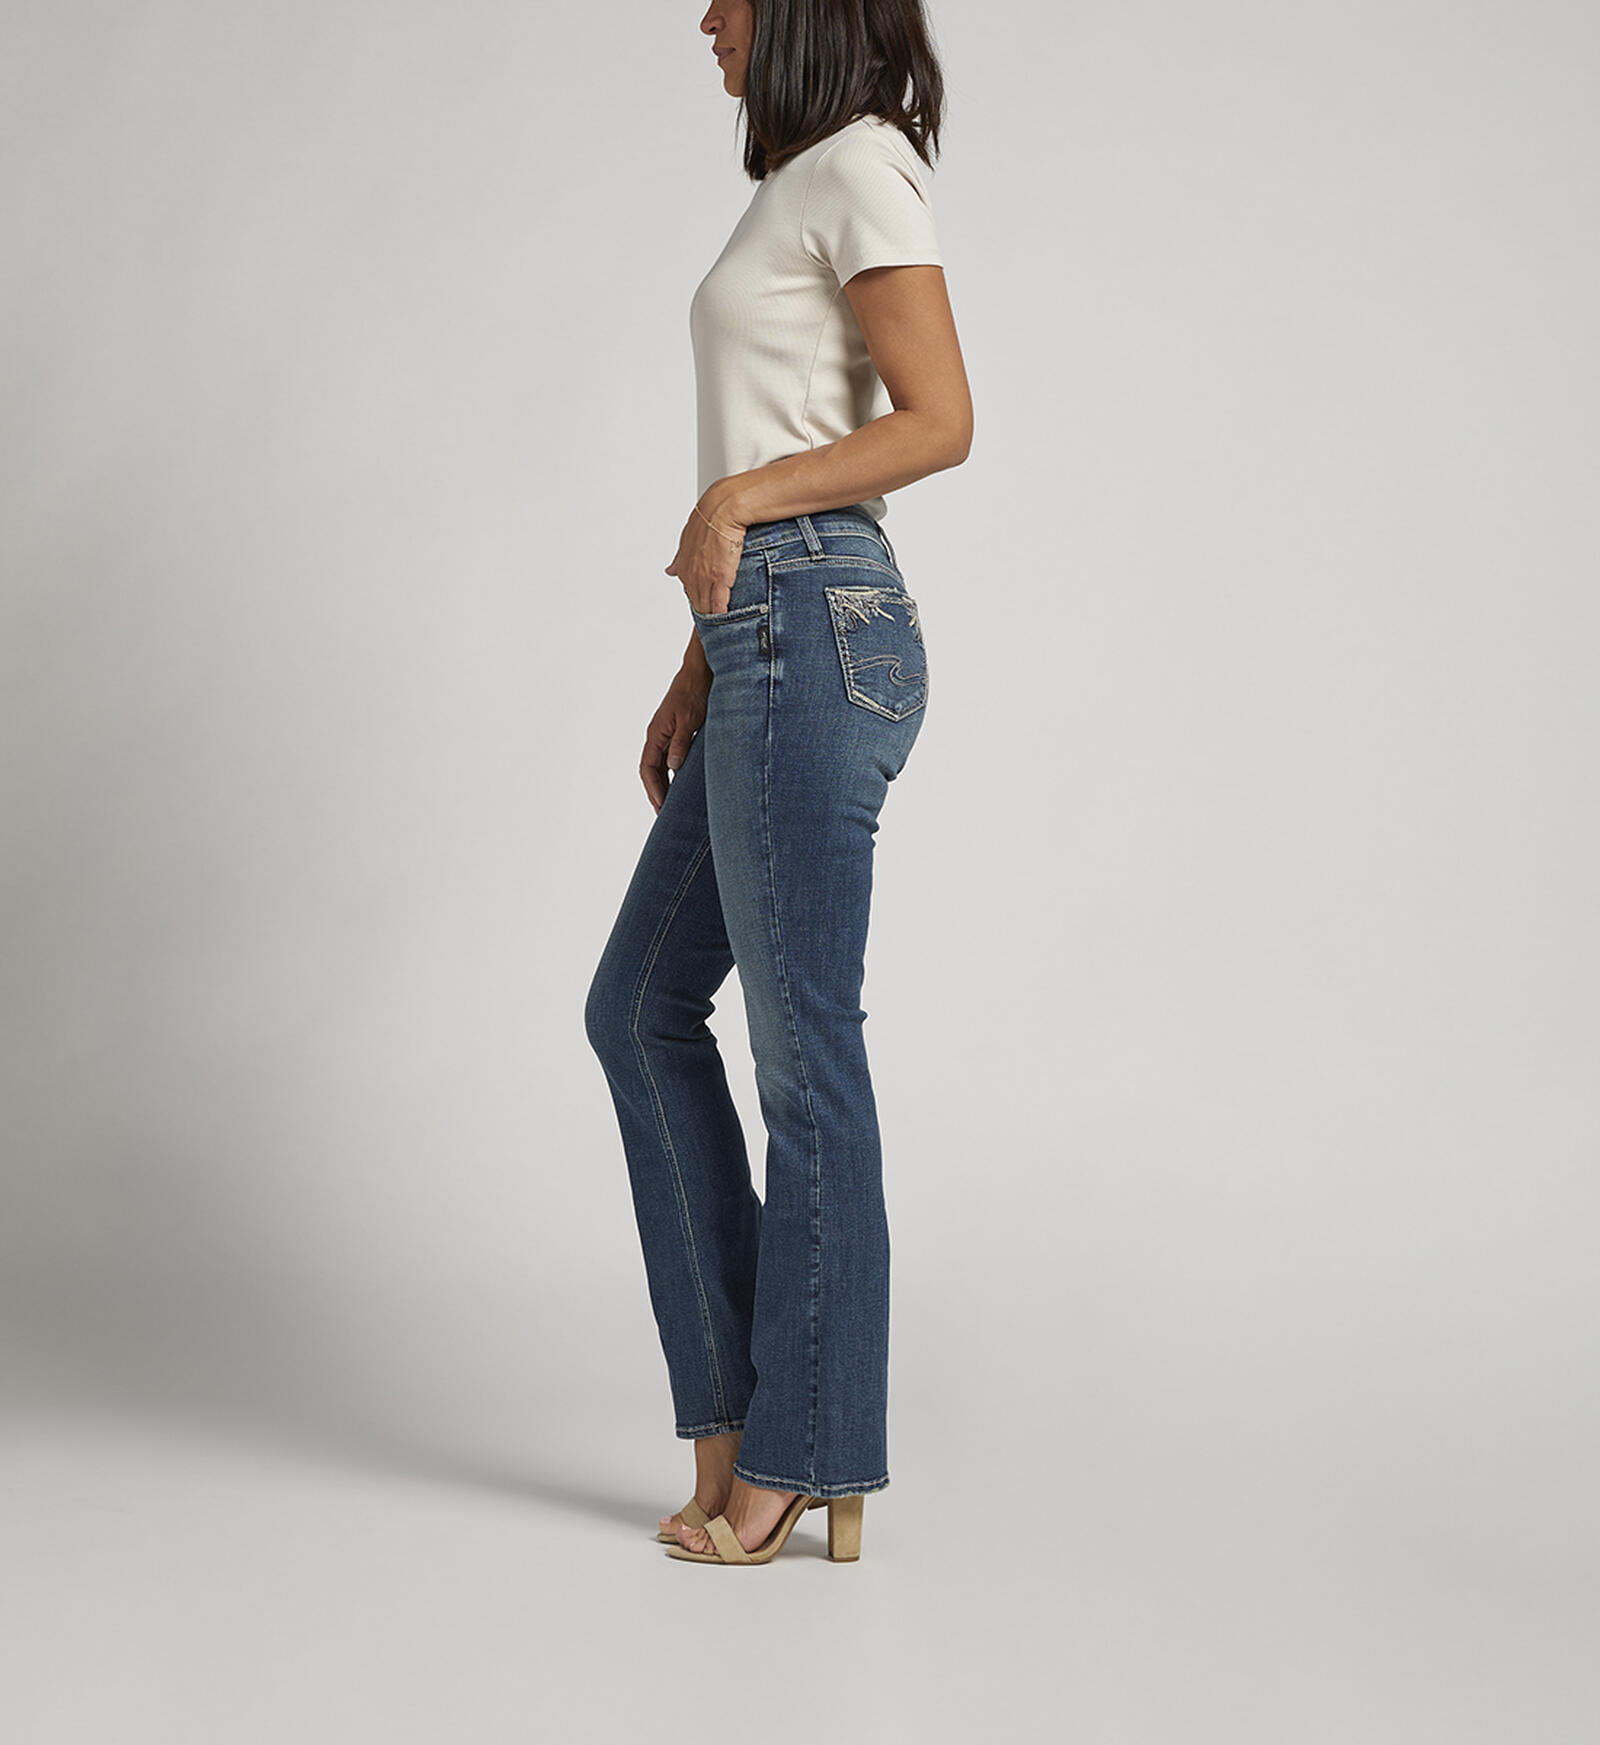 Buy Elyse Mid Rise Slim Bootcut Jeans for USD 59.00